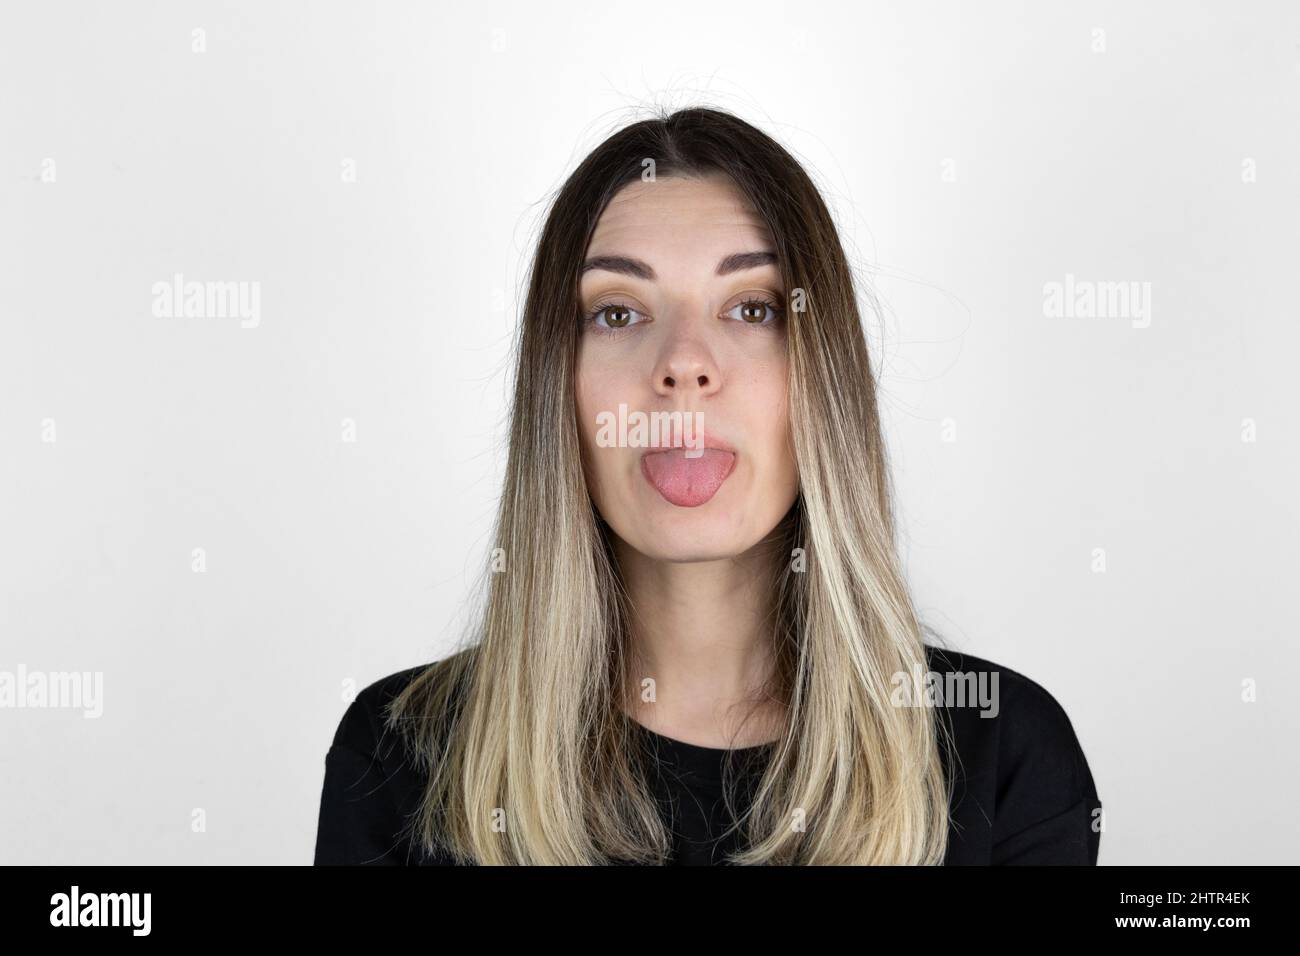 Young woman sticking out tounge, close up portrait. Teasing you through camera while isolated with white background. Stock Photo